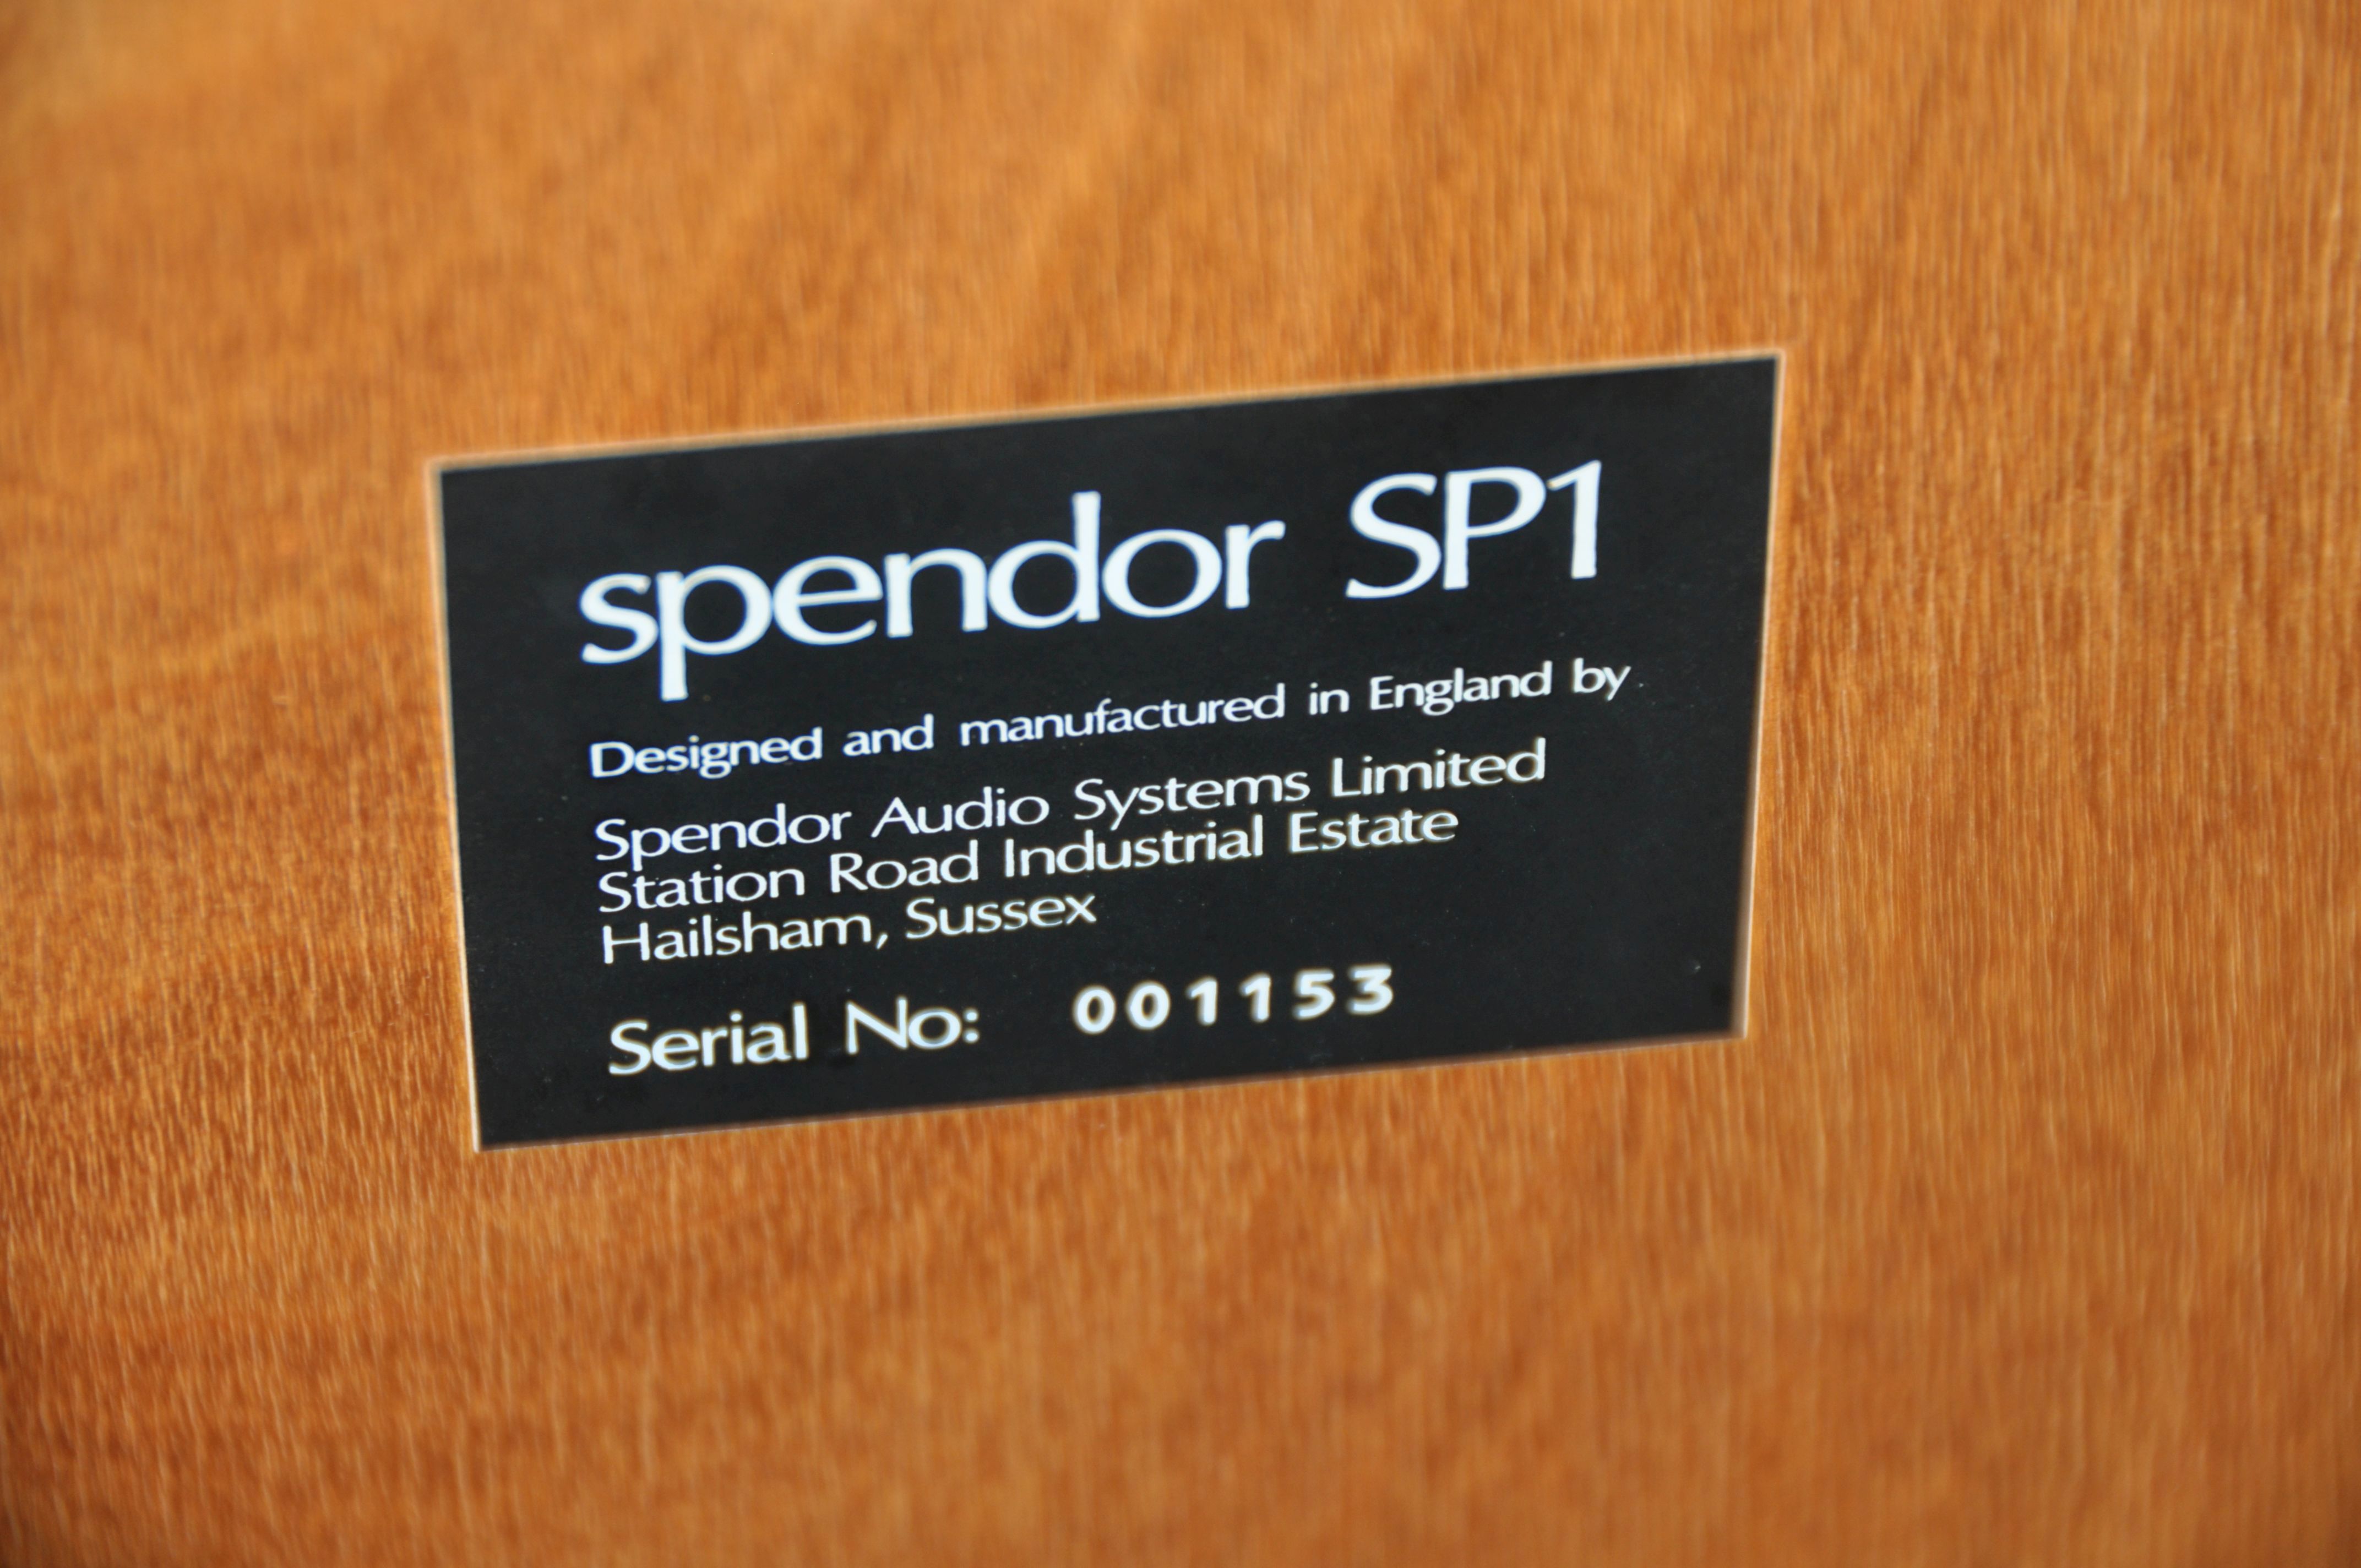 A PAIR OF SPENDOR SP1 VINTAGE HI FI SPEAKER CABINETS with two horns fitted but no 8in drivers in - Image 6 of 6